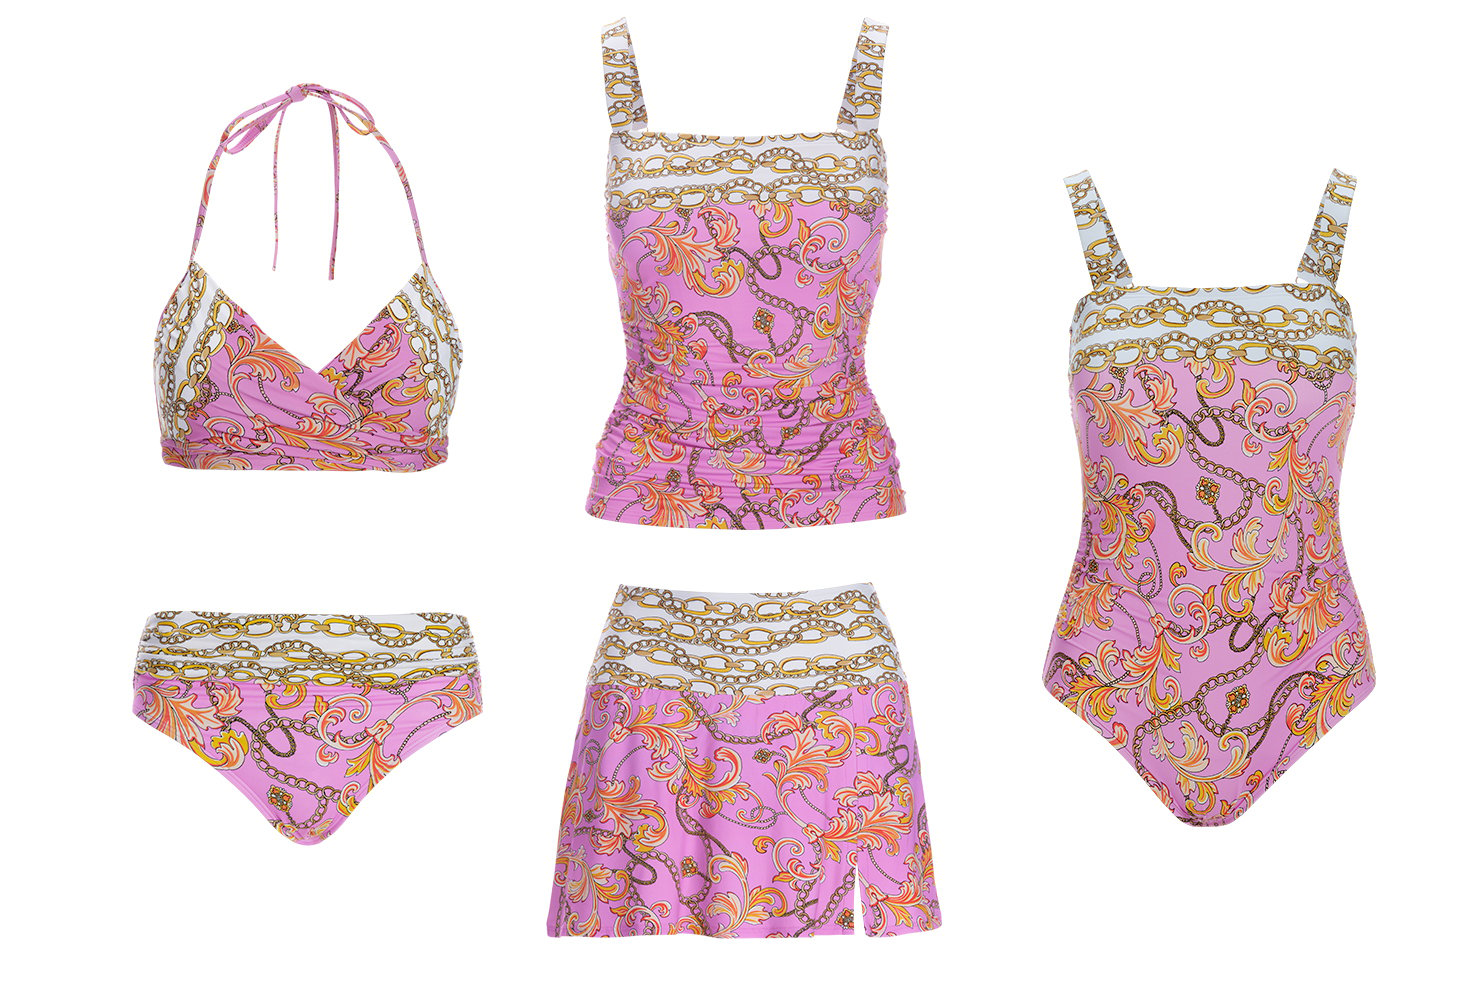 from left to right: pink chain print bikini, pink chain print tankini with skirted bottom, pink chain printed one piece swimsuit.